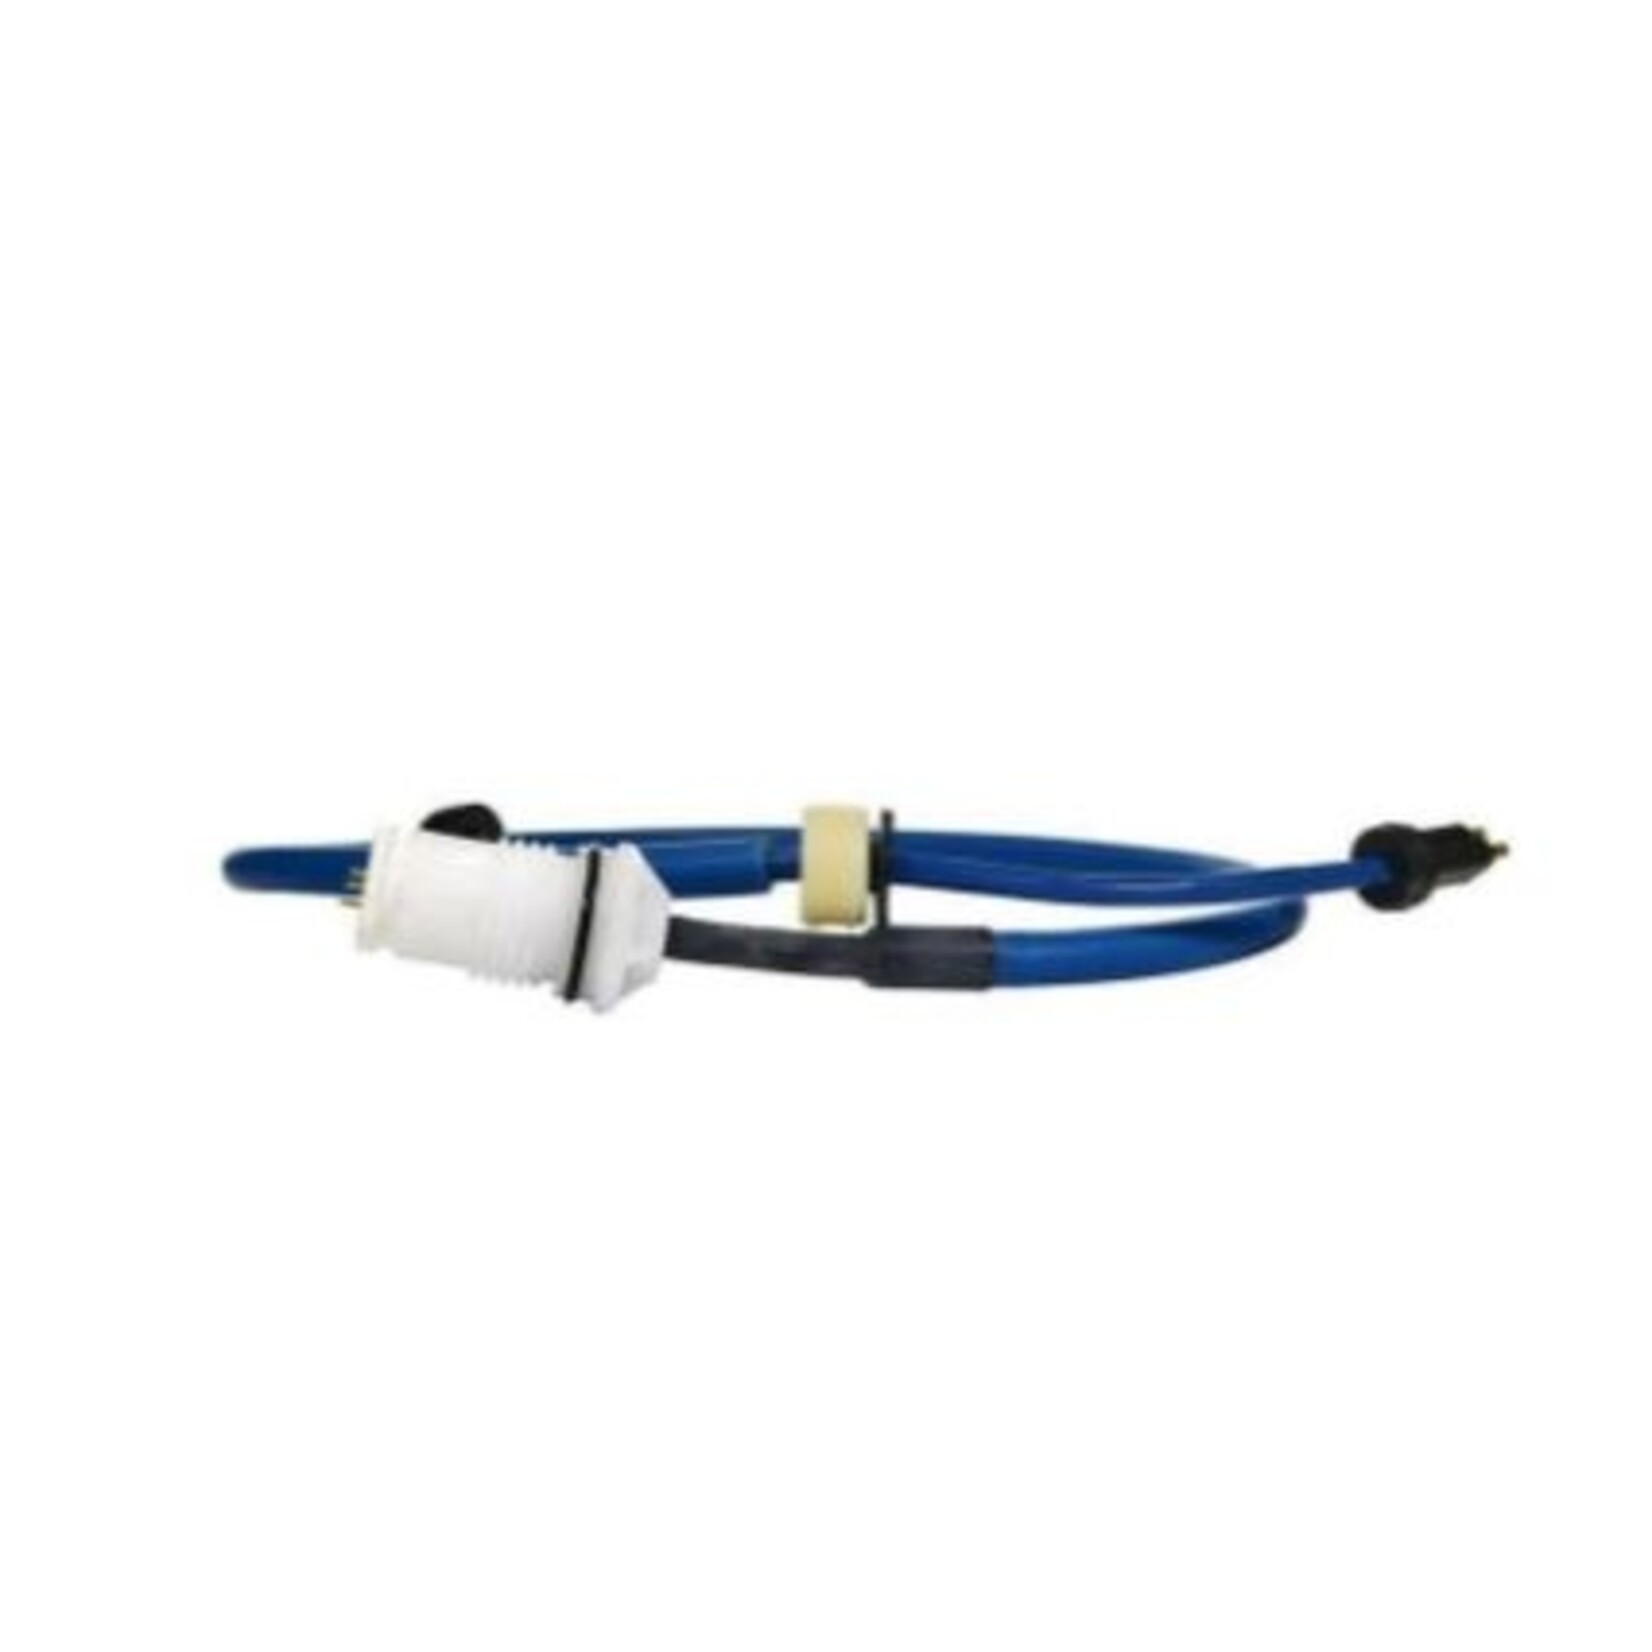 Maytronics Dolphin Dolphin Dynamic Motor kabel 1.20 voor M400